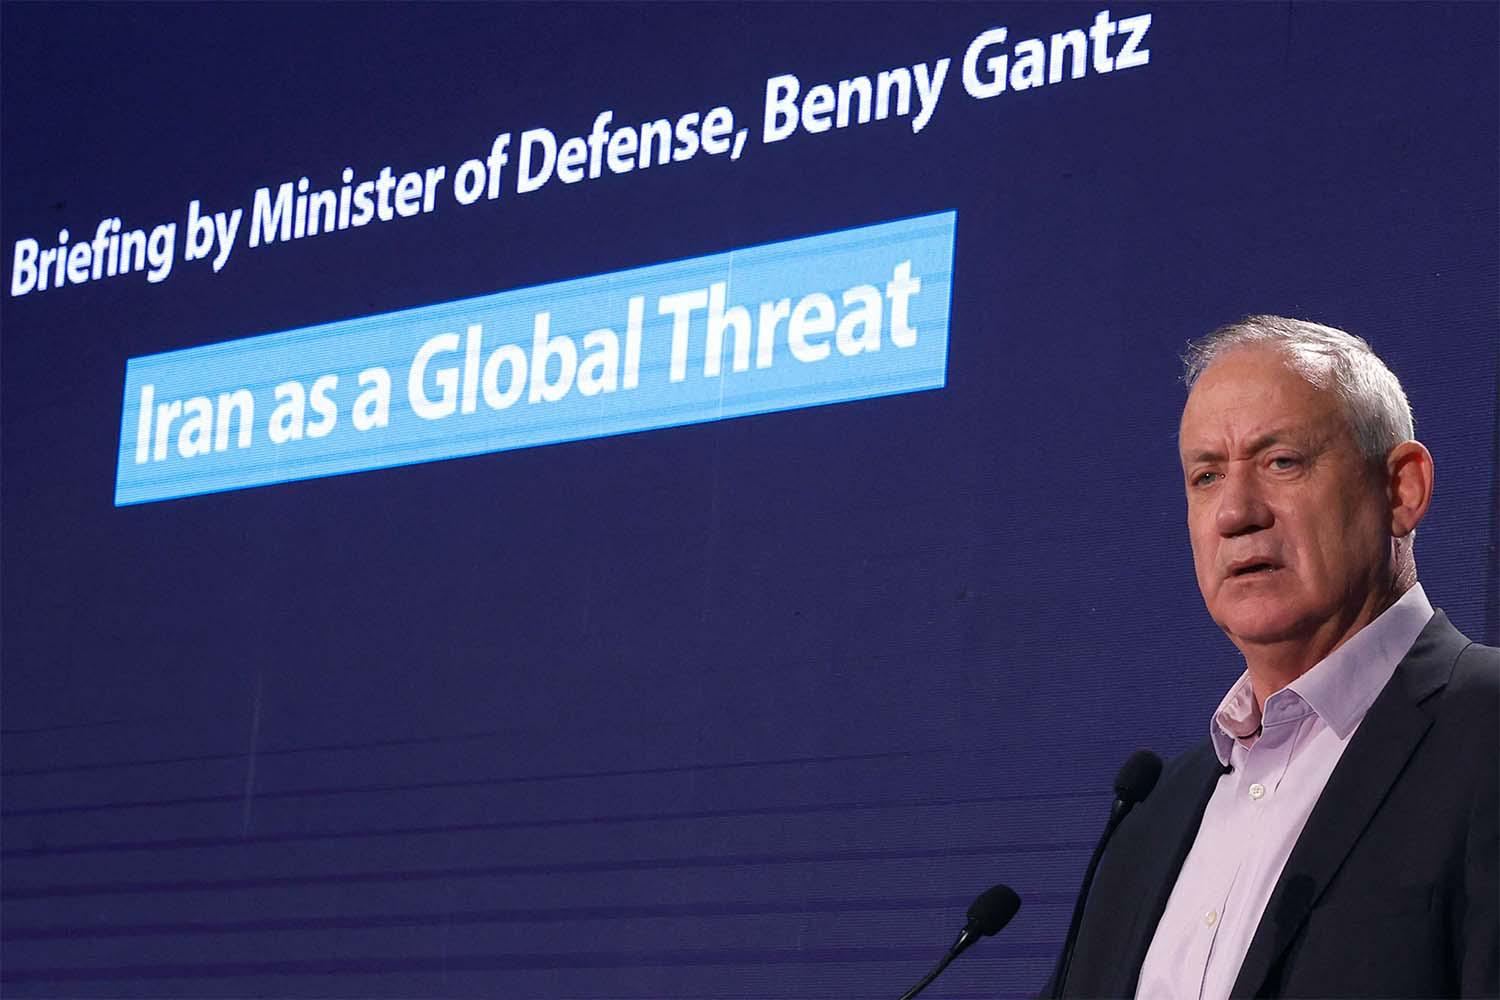 Gantz made the allegation during a televised speech at a security conference hosted by Reichman University